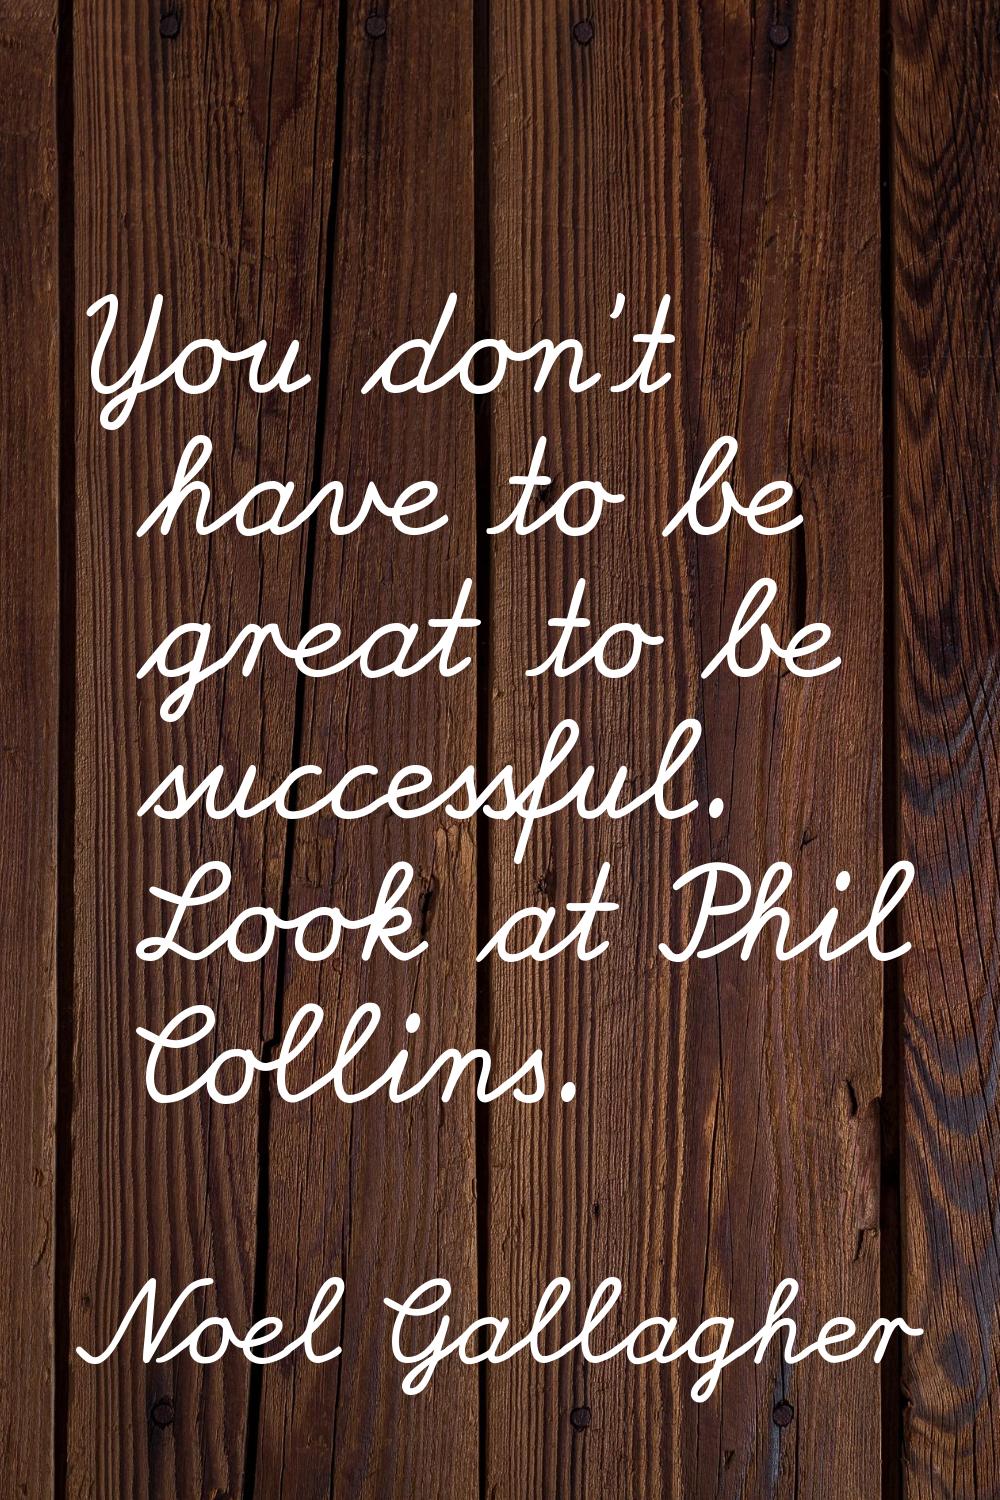 You don't have to be great to be successful. Look at Phil Collins.